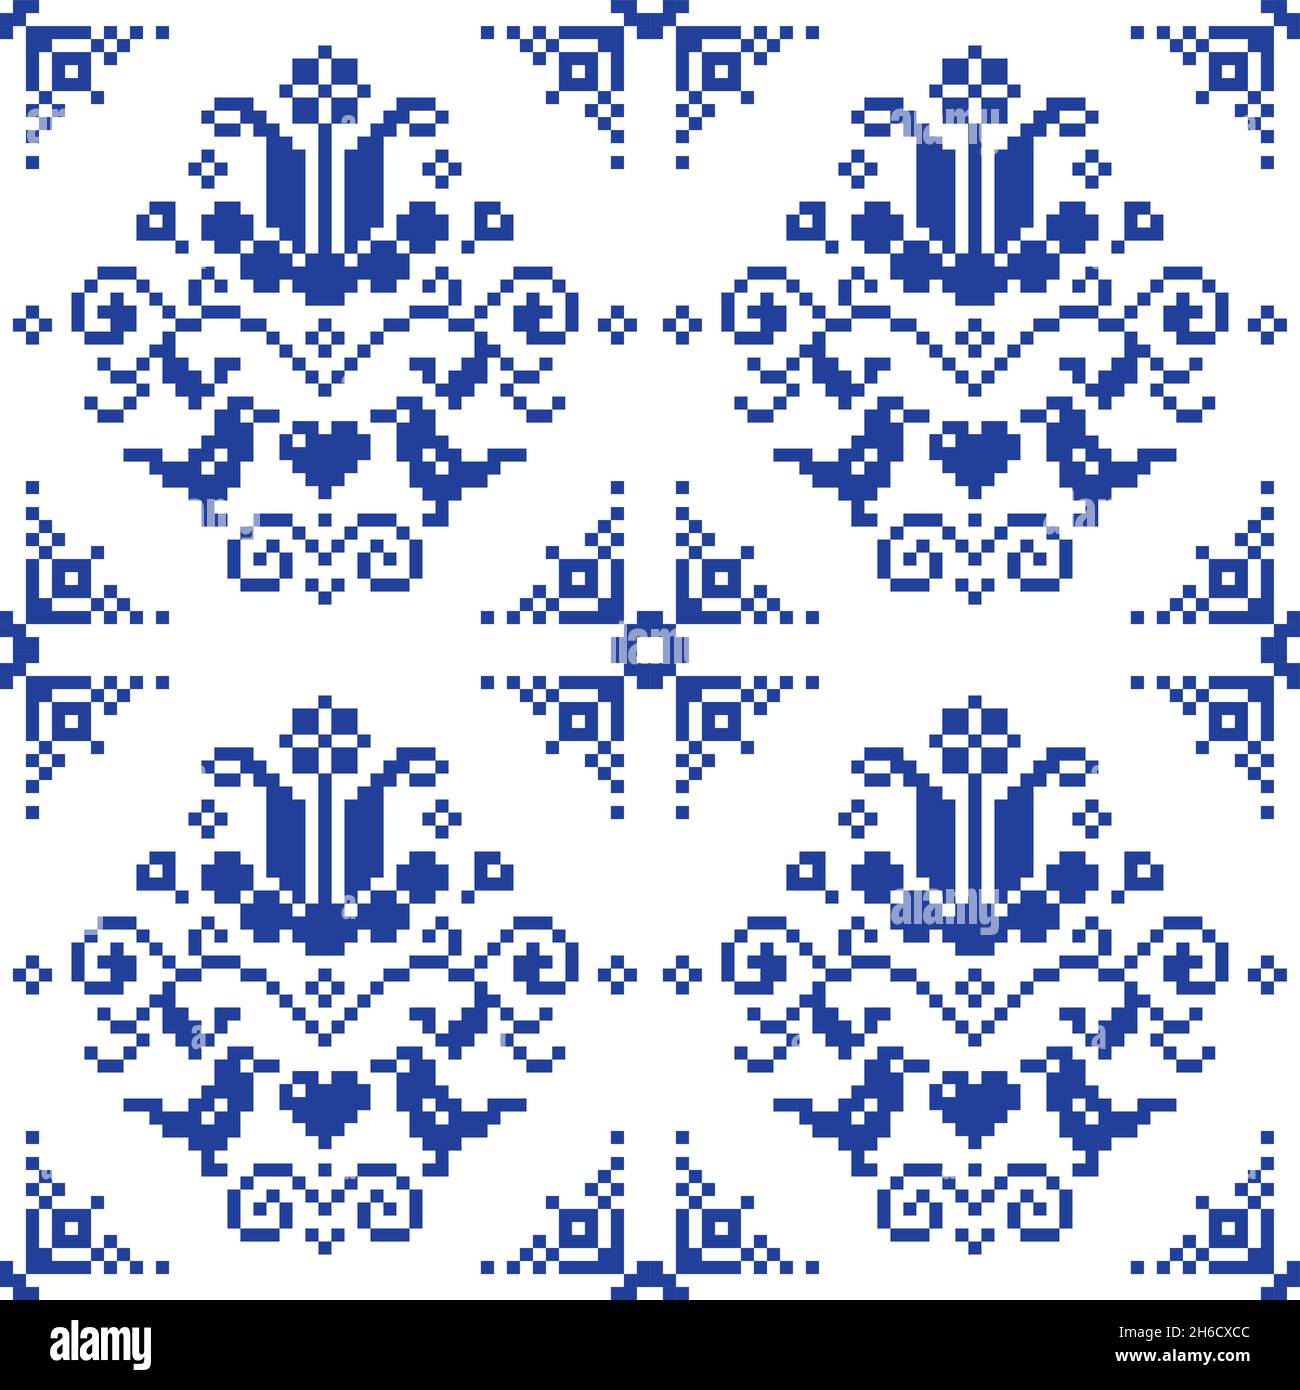 Retro cross-stitch vector floral seamless pattern, folk art repetitive background inspired by old German and Austrian style embroidery Stock Vector